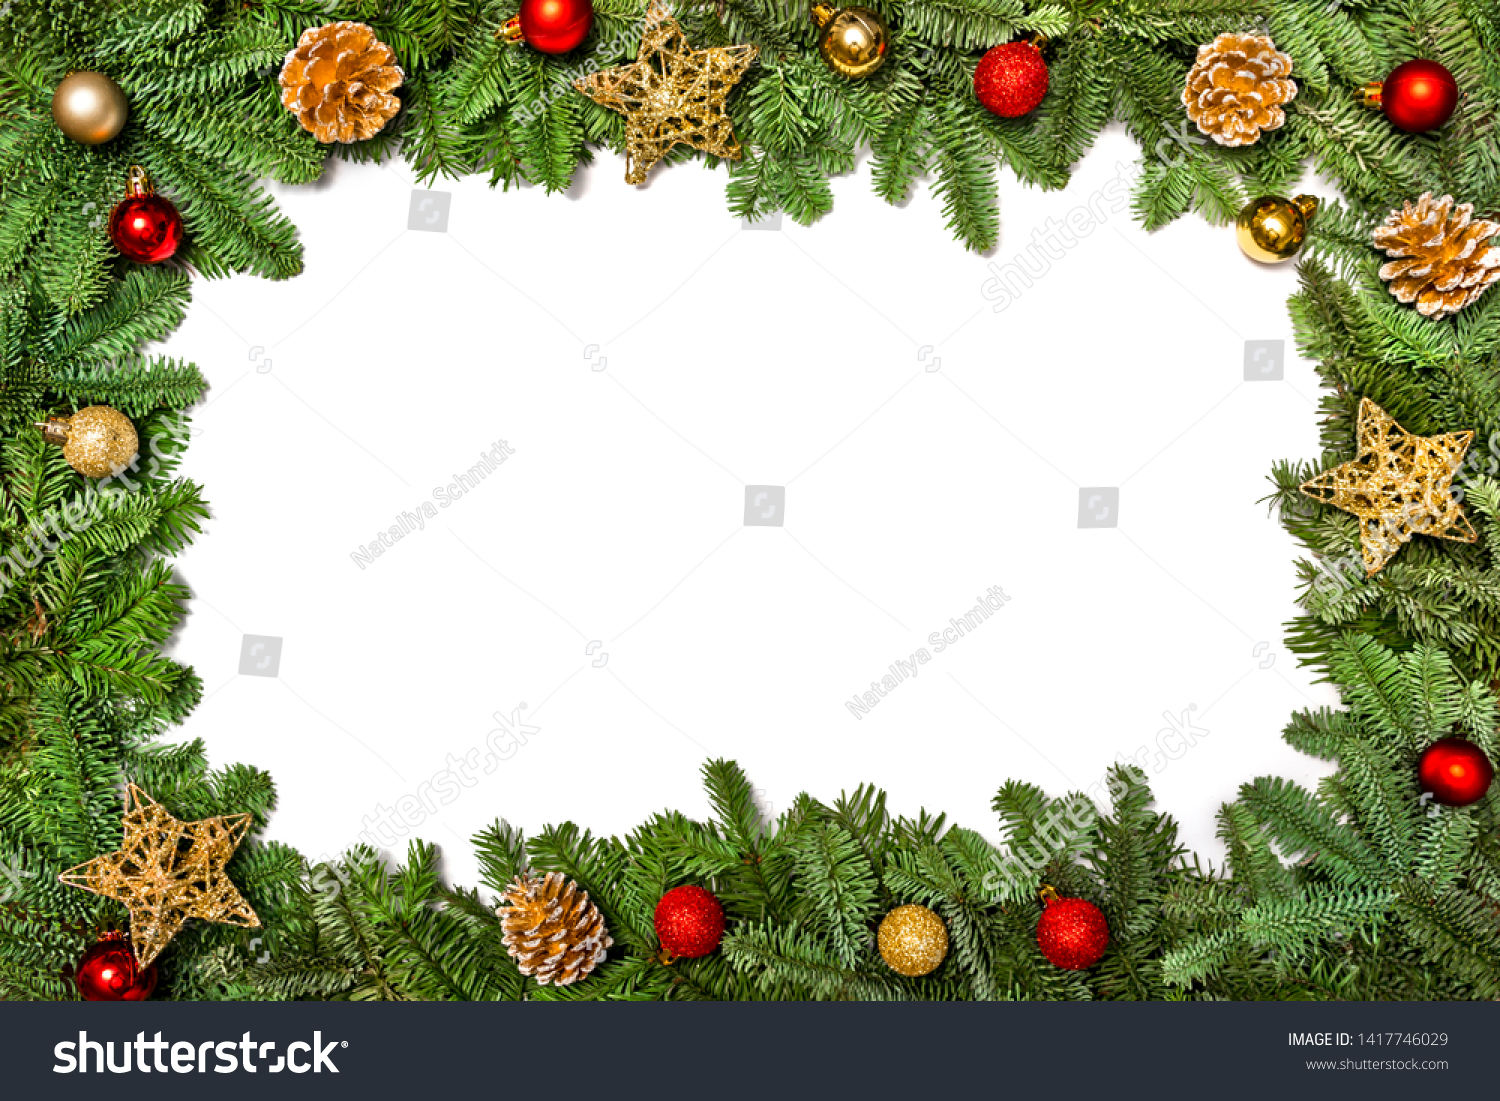  Christmas frame. Christmas card. New Year`s greetings. Frame with branches of a Christmas tree decorated with balls, toys and cookies #1417746029